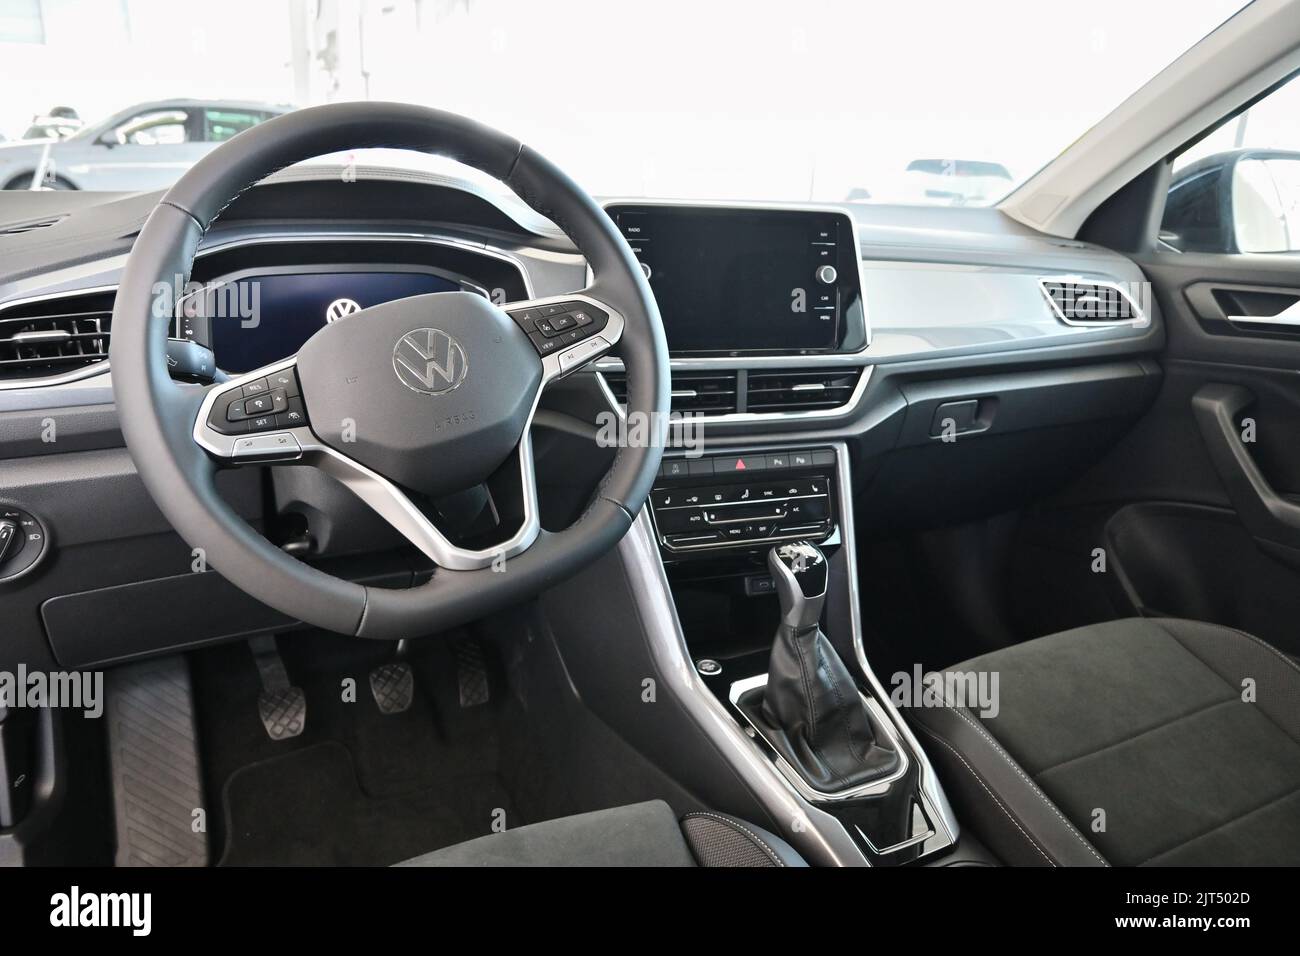 Gdansk, Poland - August 27, 2022: Interior of new model of Volkswagen T-Roc presented in the car showroom of Gdansk Stock Photo